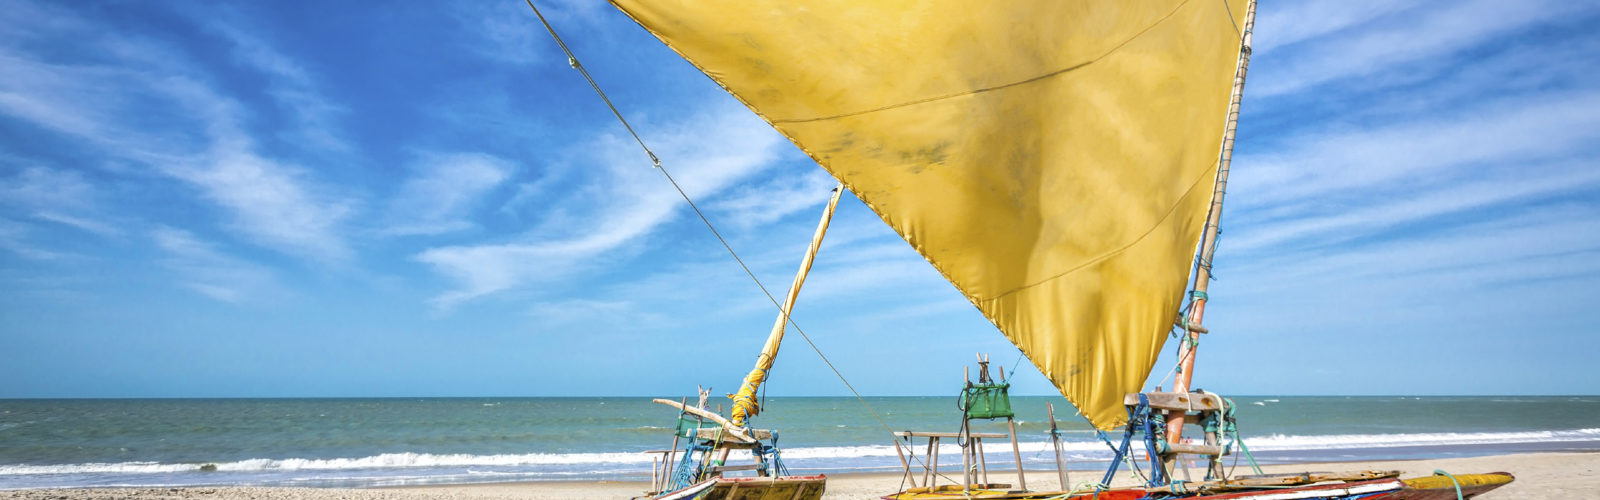 Fishing boat on the beach of Natal, Brazil